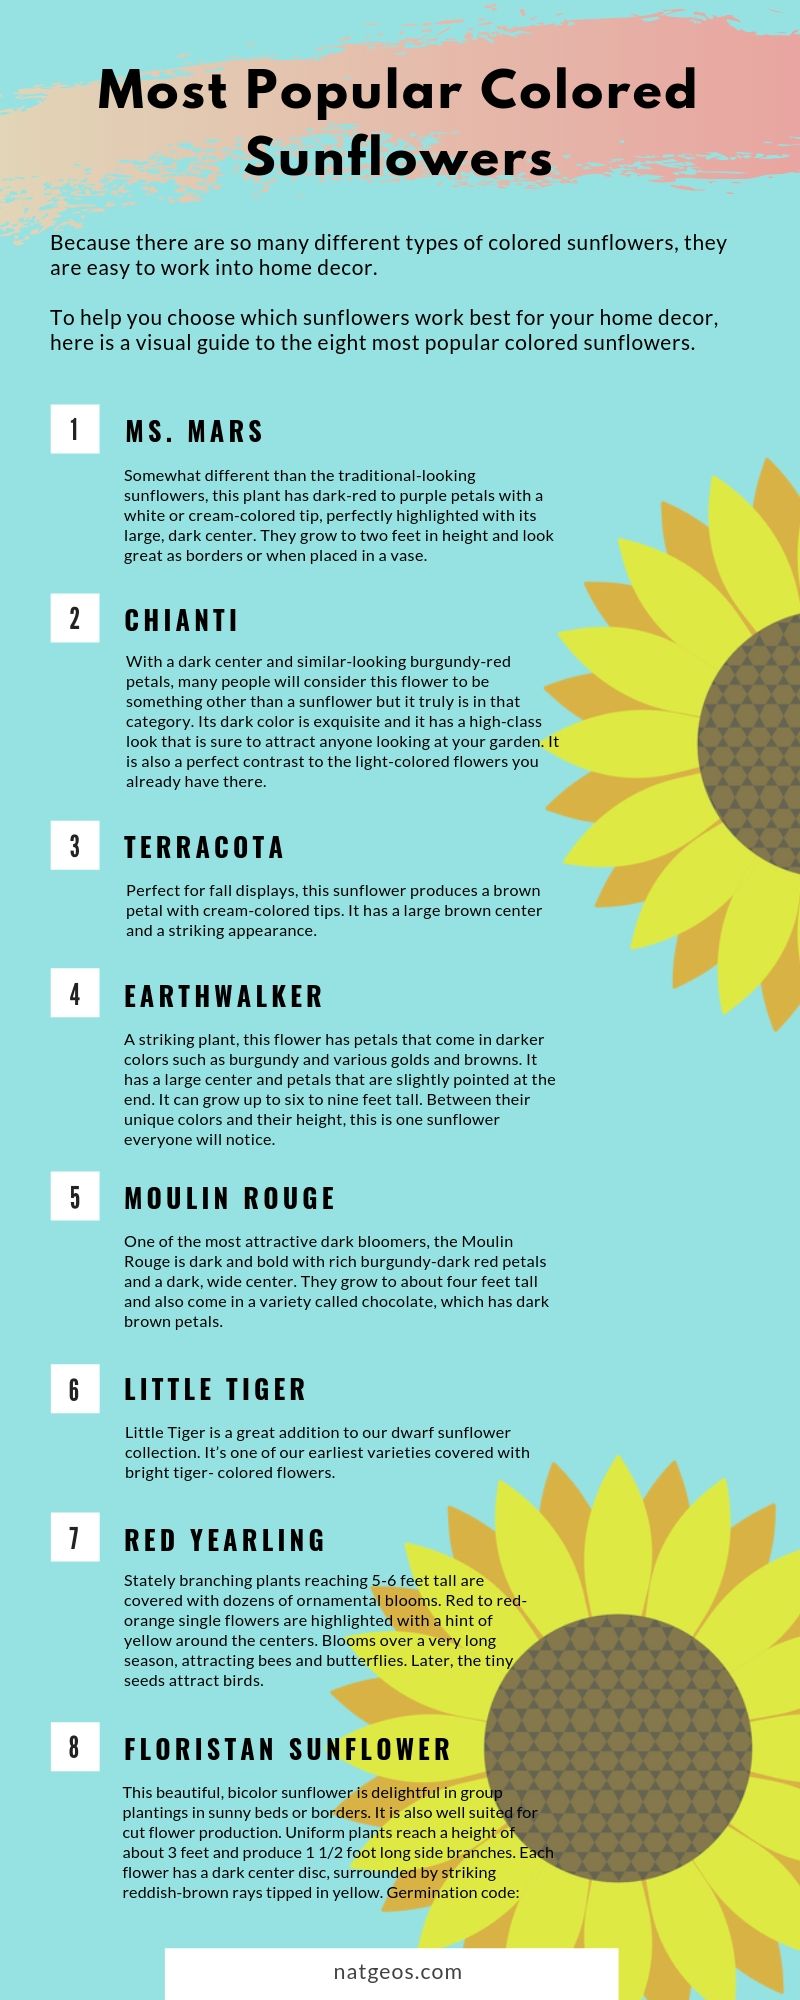 Most Popular Colored Sunflowers